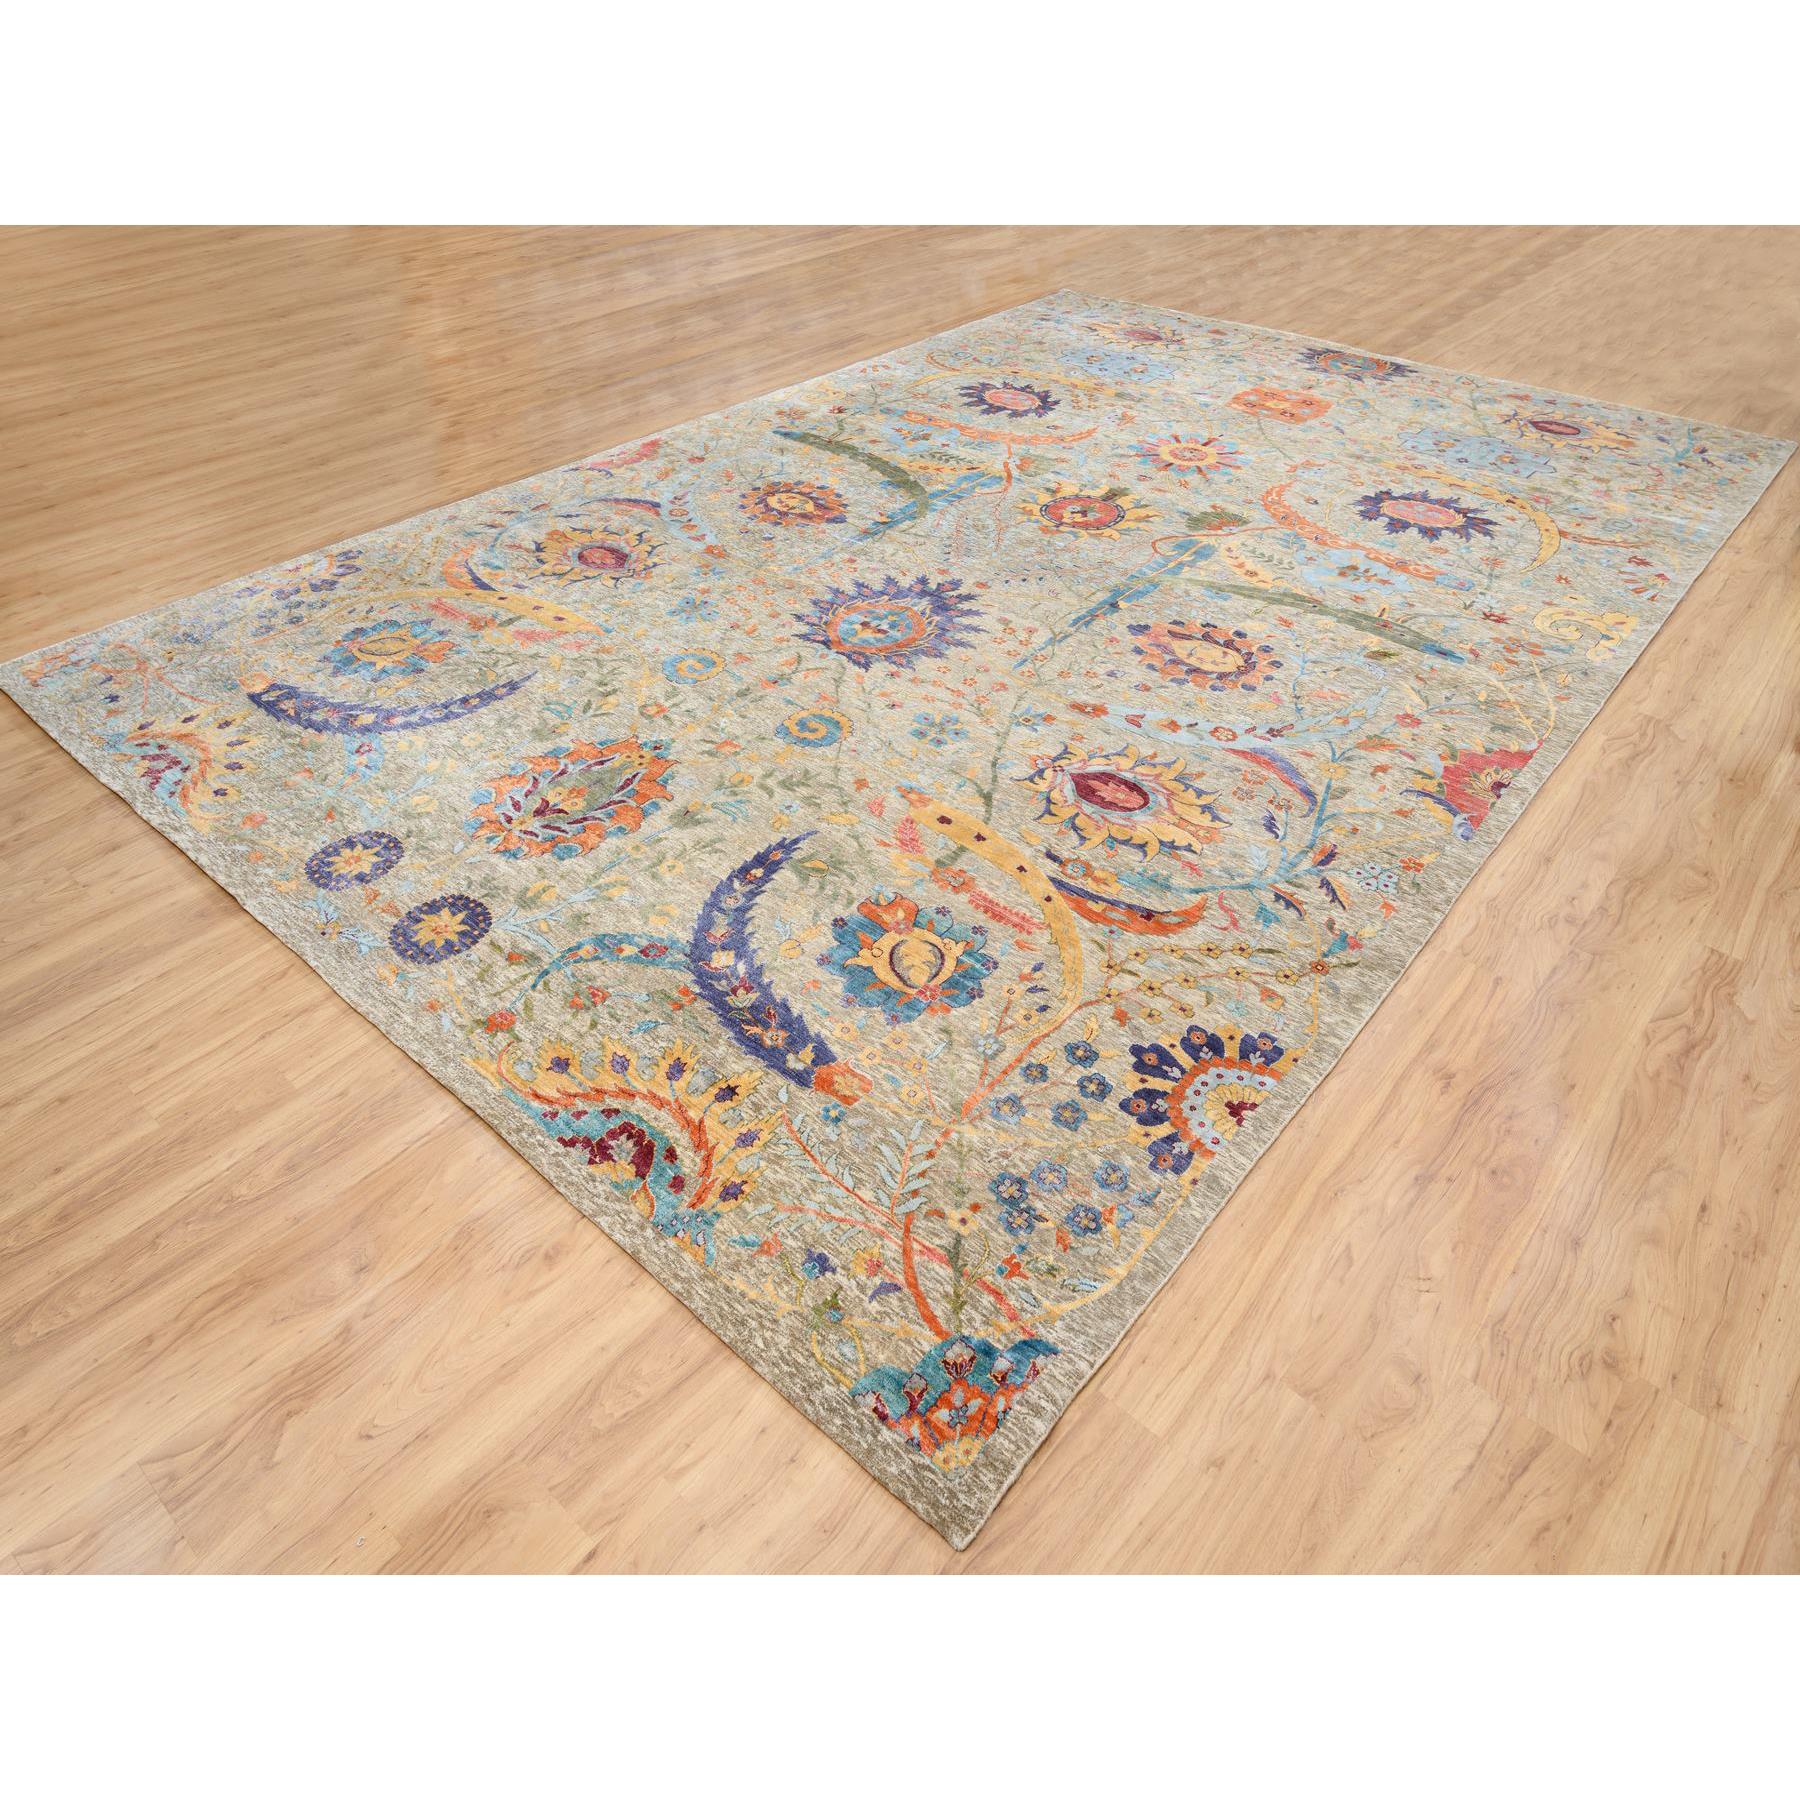 11'10"x18' Taupe, Sickle Leaf Design, Silk With Textured Wool, Hand Woven, Oriental, Oversized Rug 